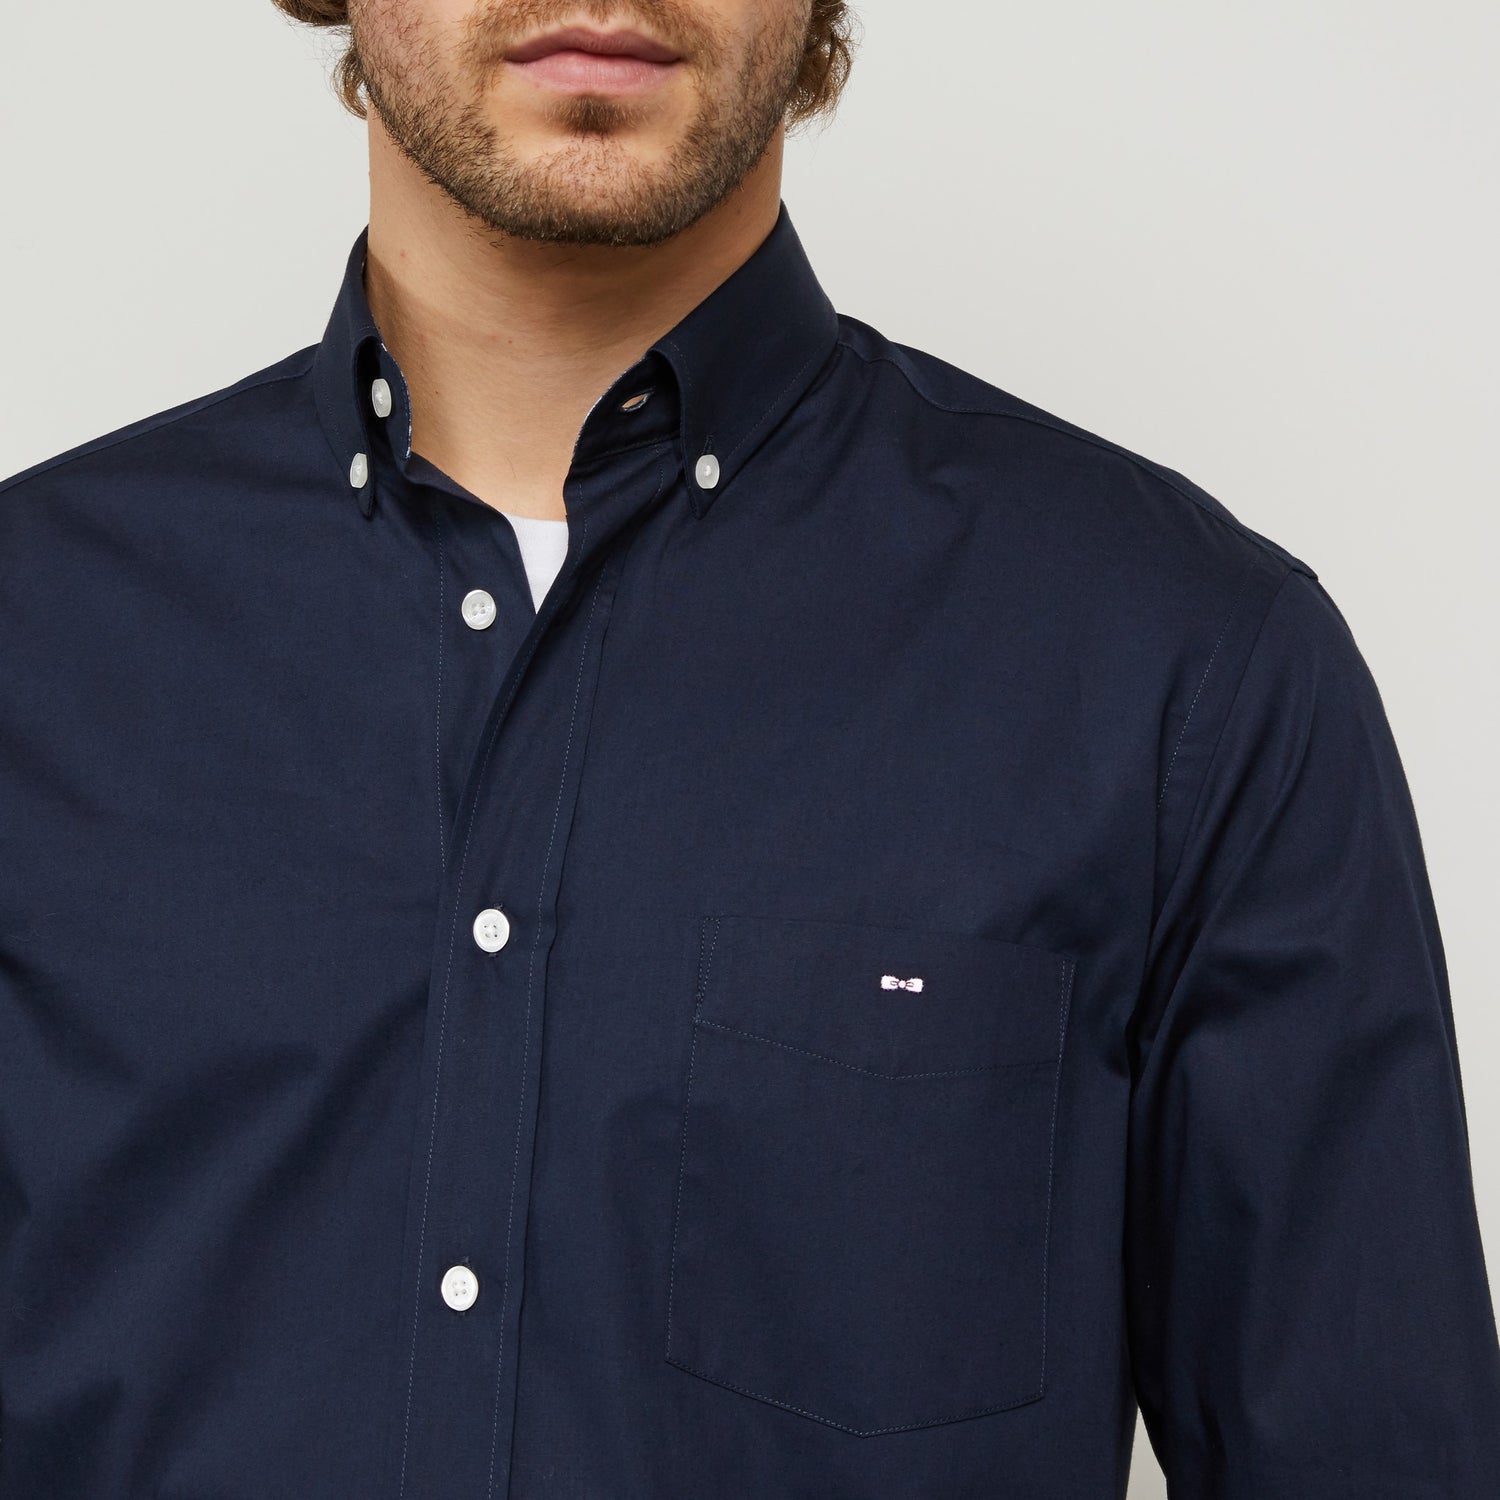 Dark Blue Shirt With Decorative Elbow Patches - 04